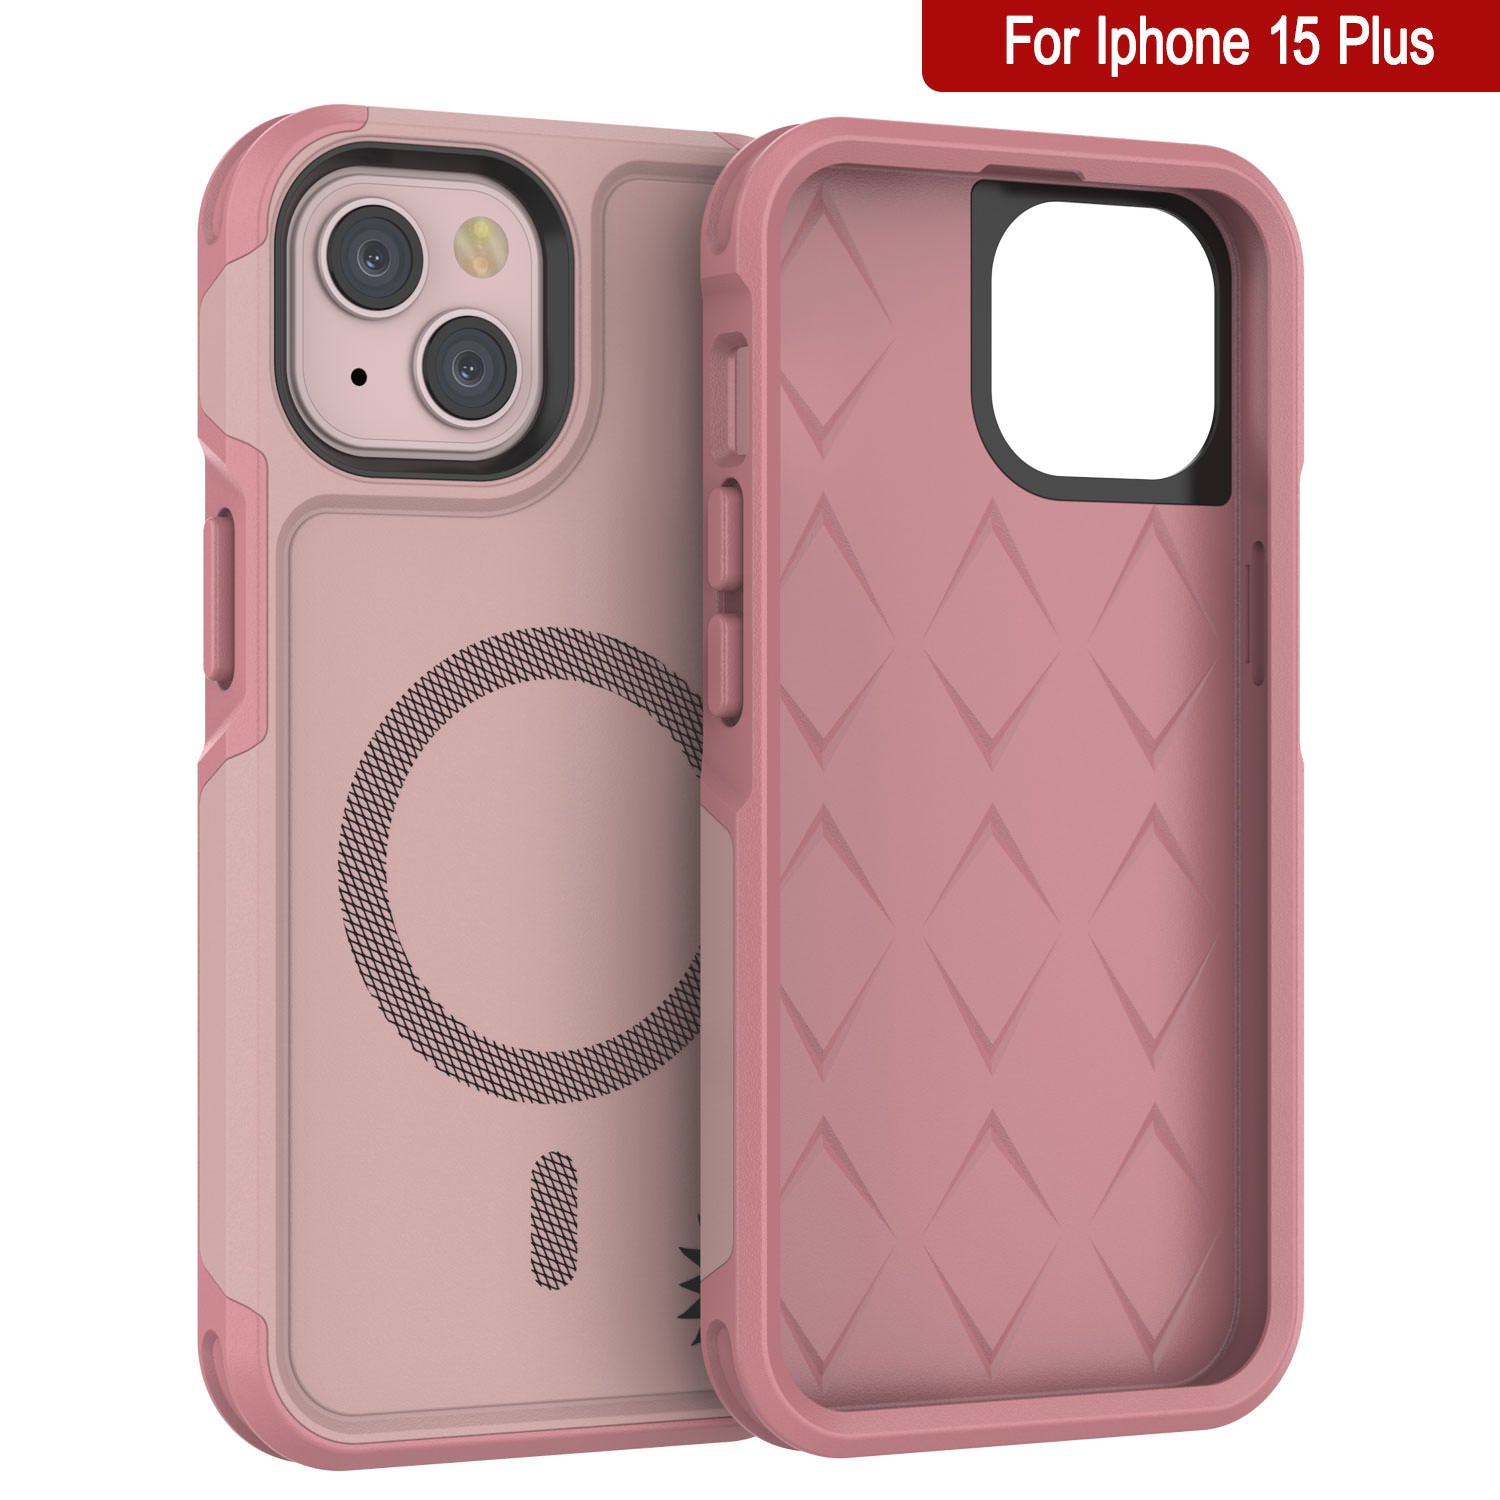 Punkcase iPhone 15 Plus Case, [Spartan 2.0 Series] Clear Rugged Heavy Duty Cover w/Built in Screen Protector [Pink]